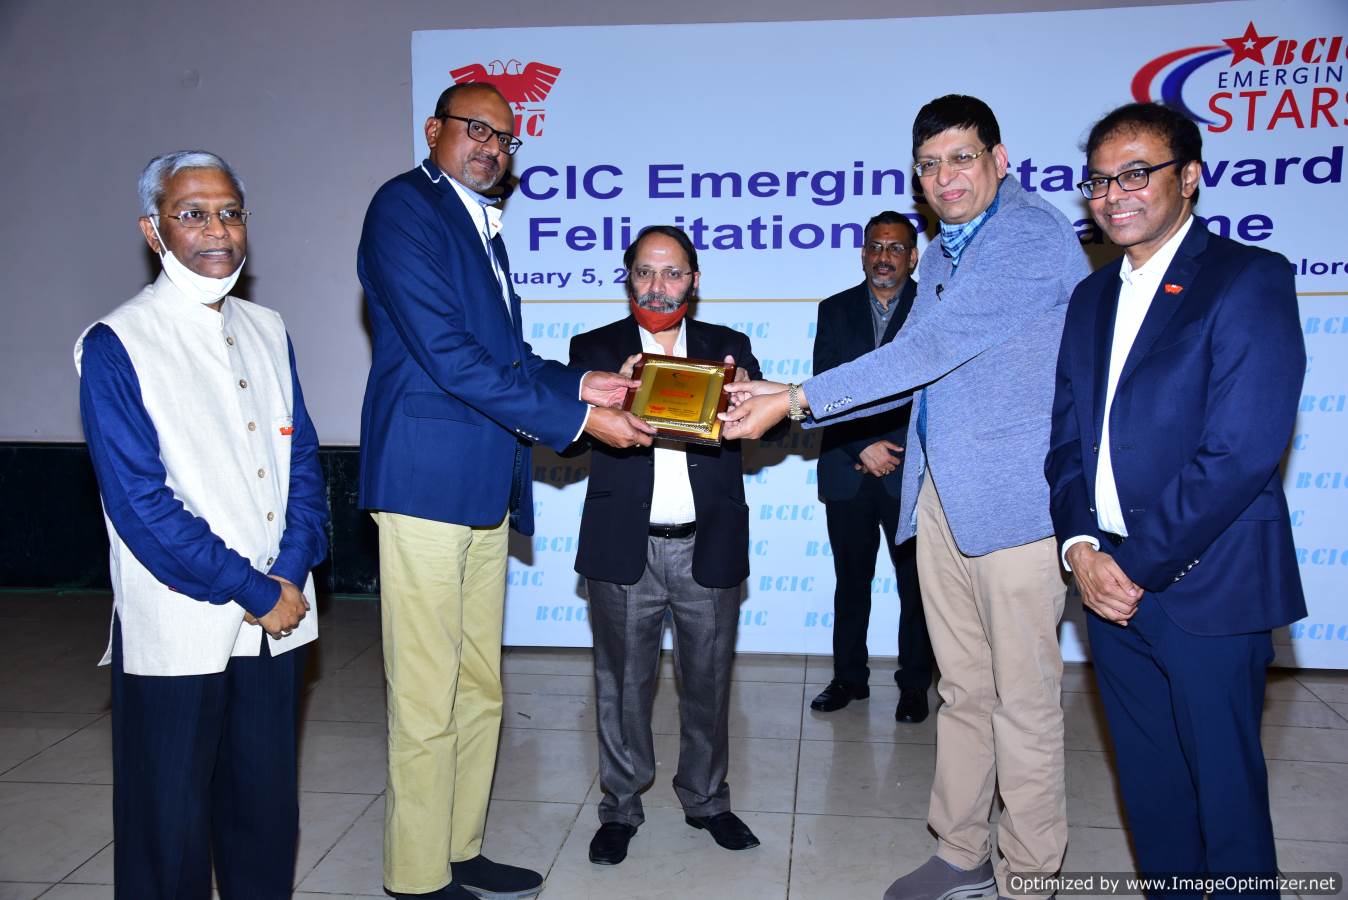 Bcic-awards-gallery-image-12